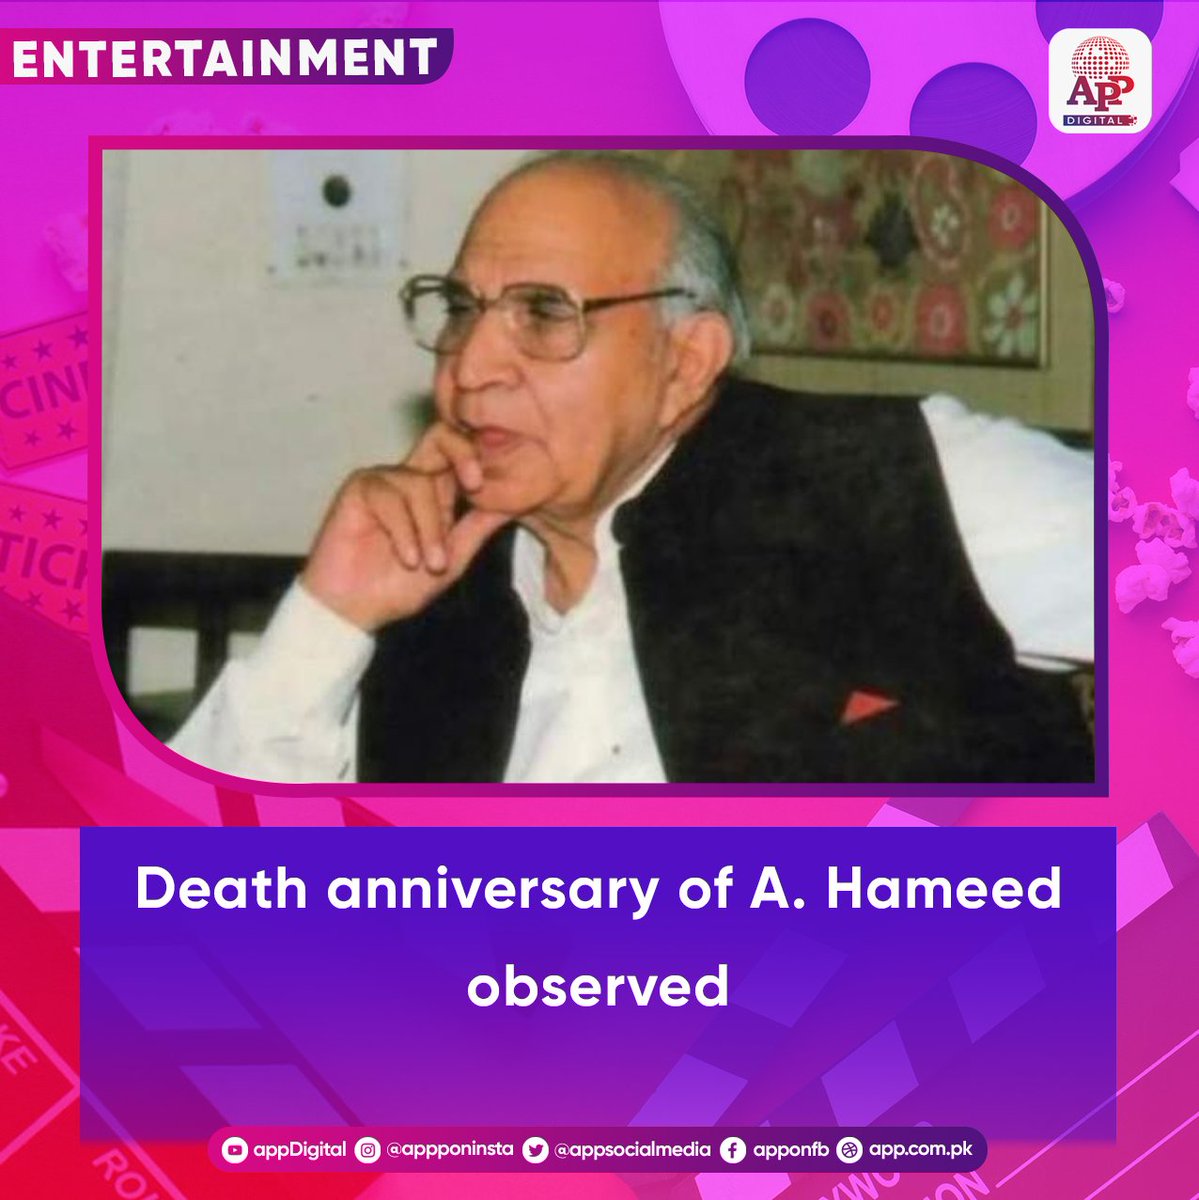 Death anniversary of famous music director A. Hameed was observed on Monday. Born in Amritsar in 1924, he started his career as a pianist. #Pakistan #Music #AbdulHameed